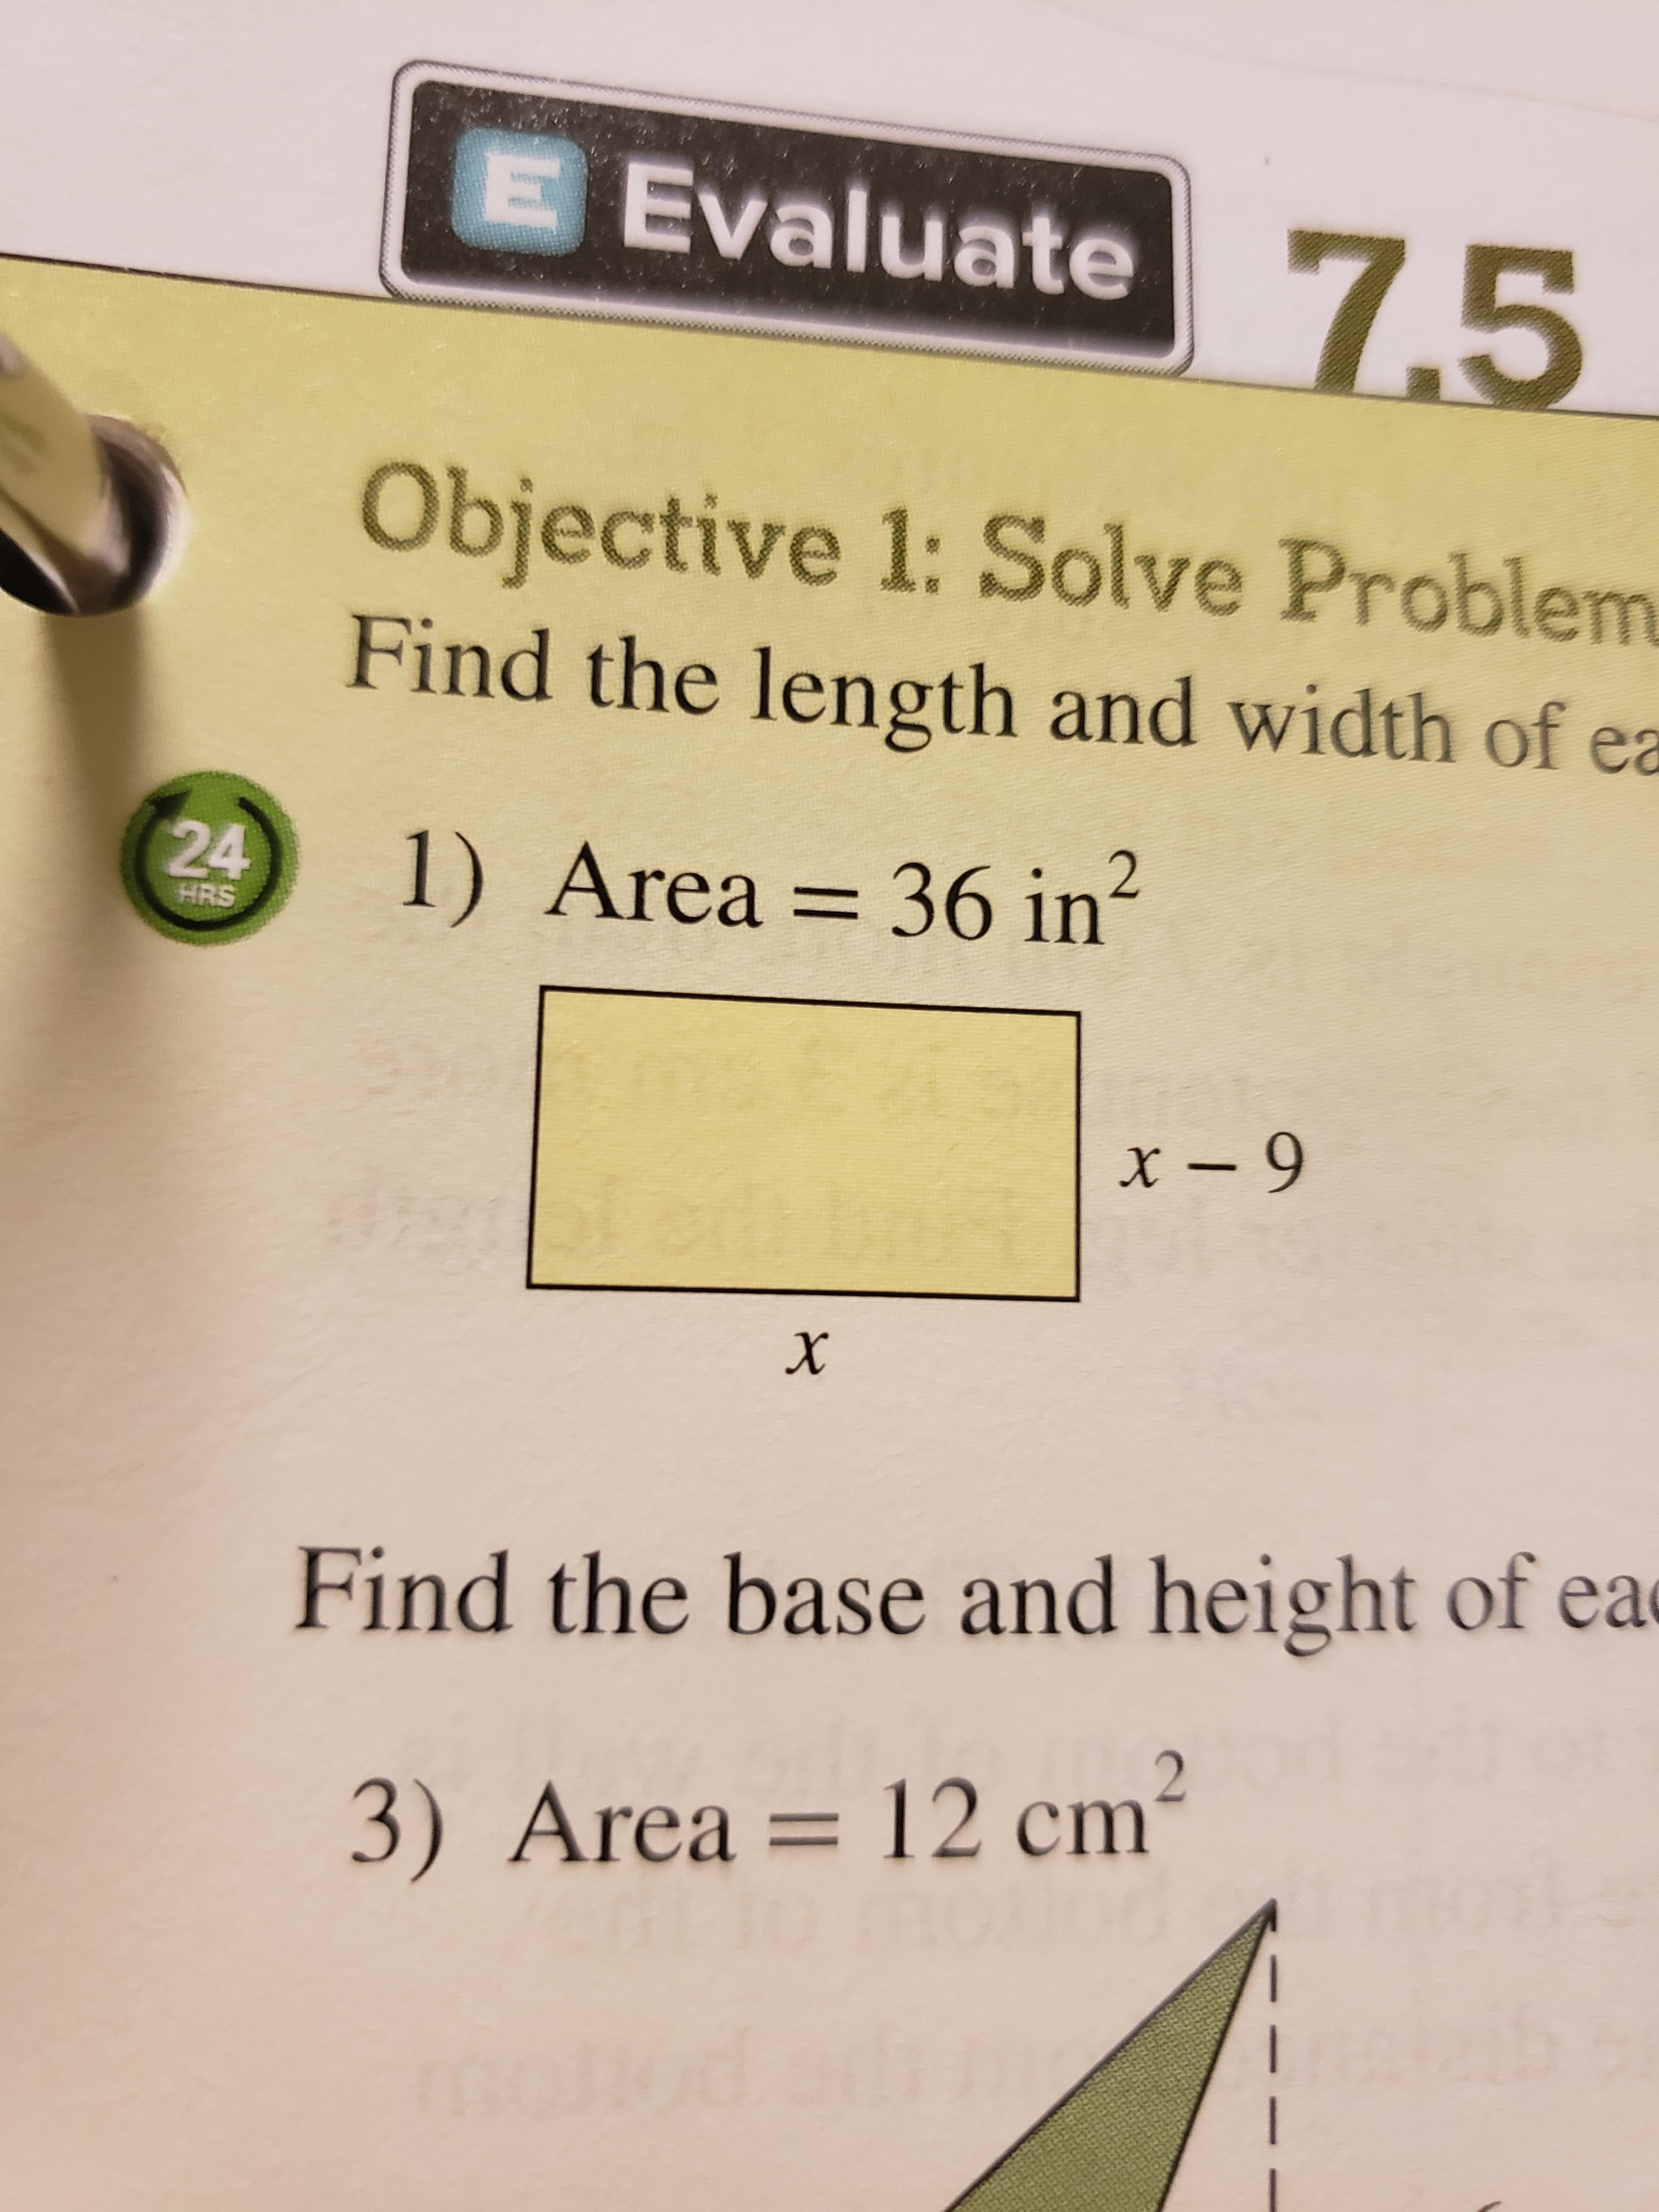 E Evaluate
7.5
Objective 1: Solve Problem
Find the length and width of ea
24
1) Area 36 in
HRS
x-9
Find the base and height of ea
2
3) Area = 12 cm
